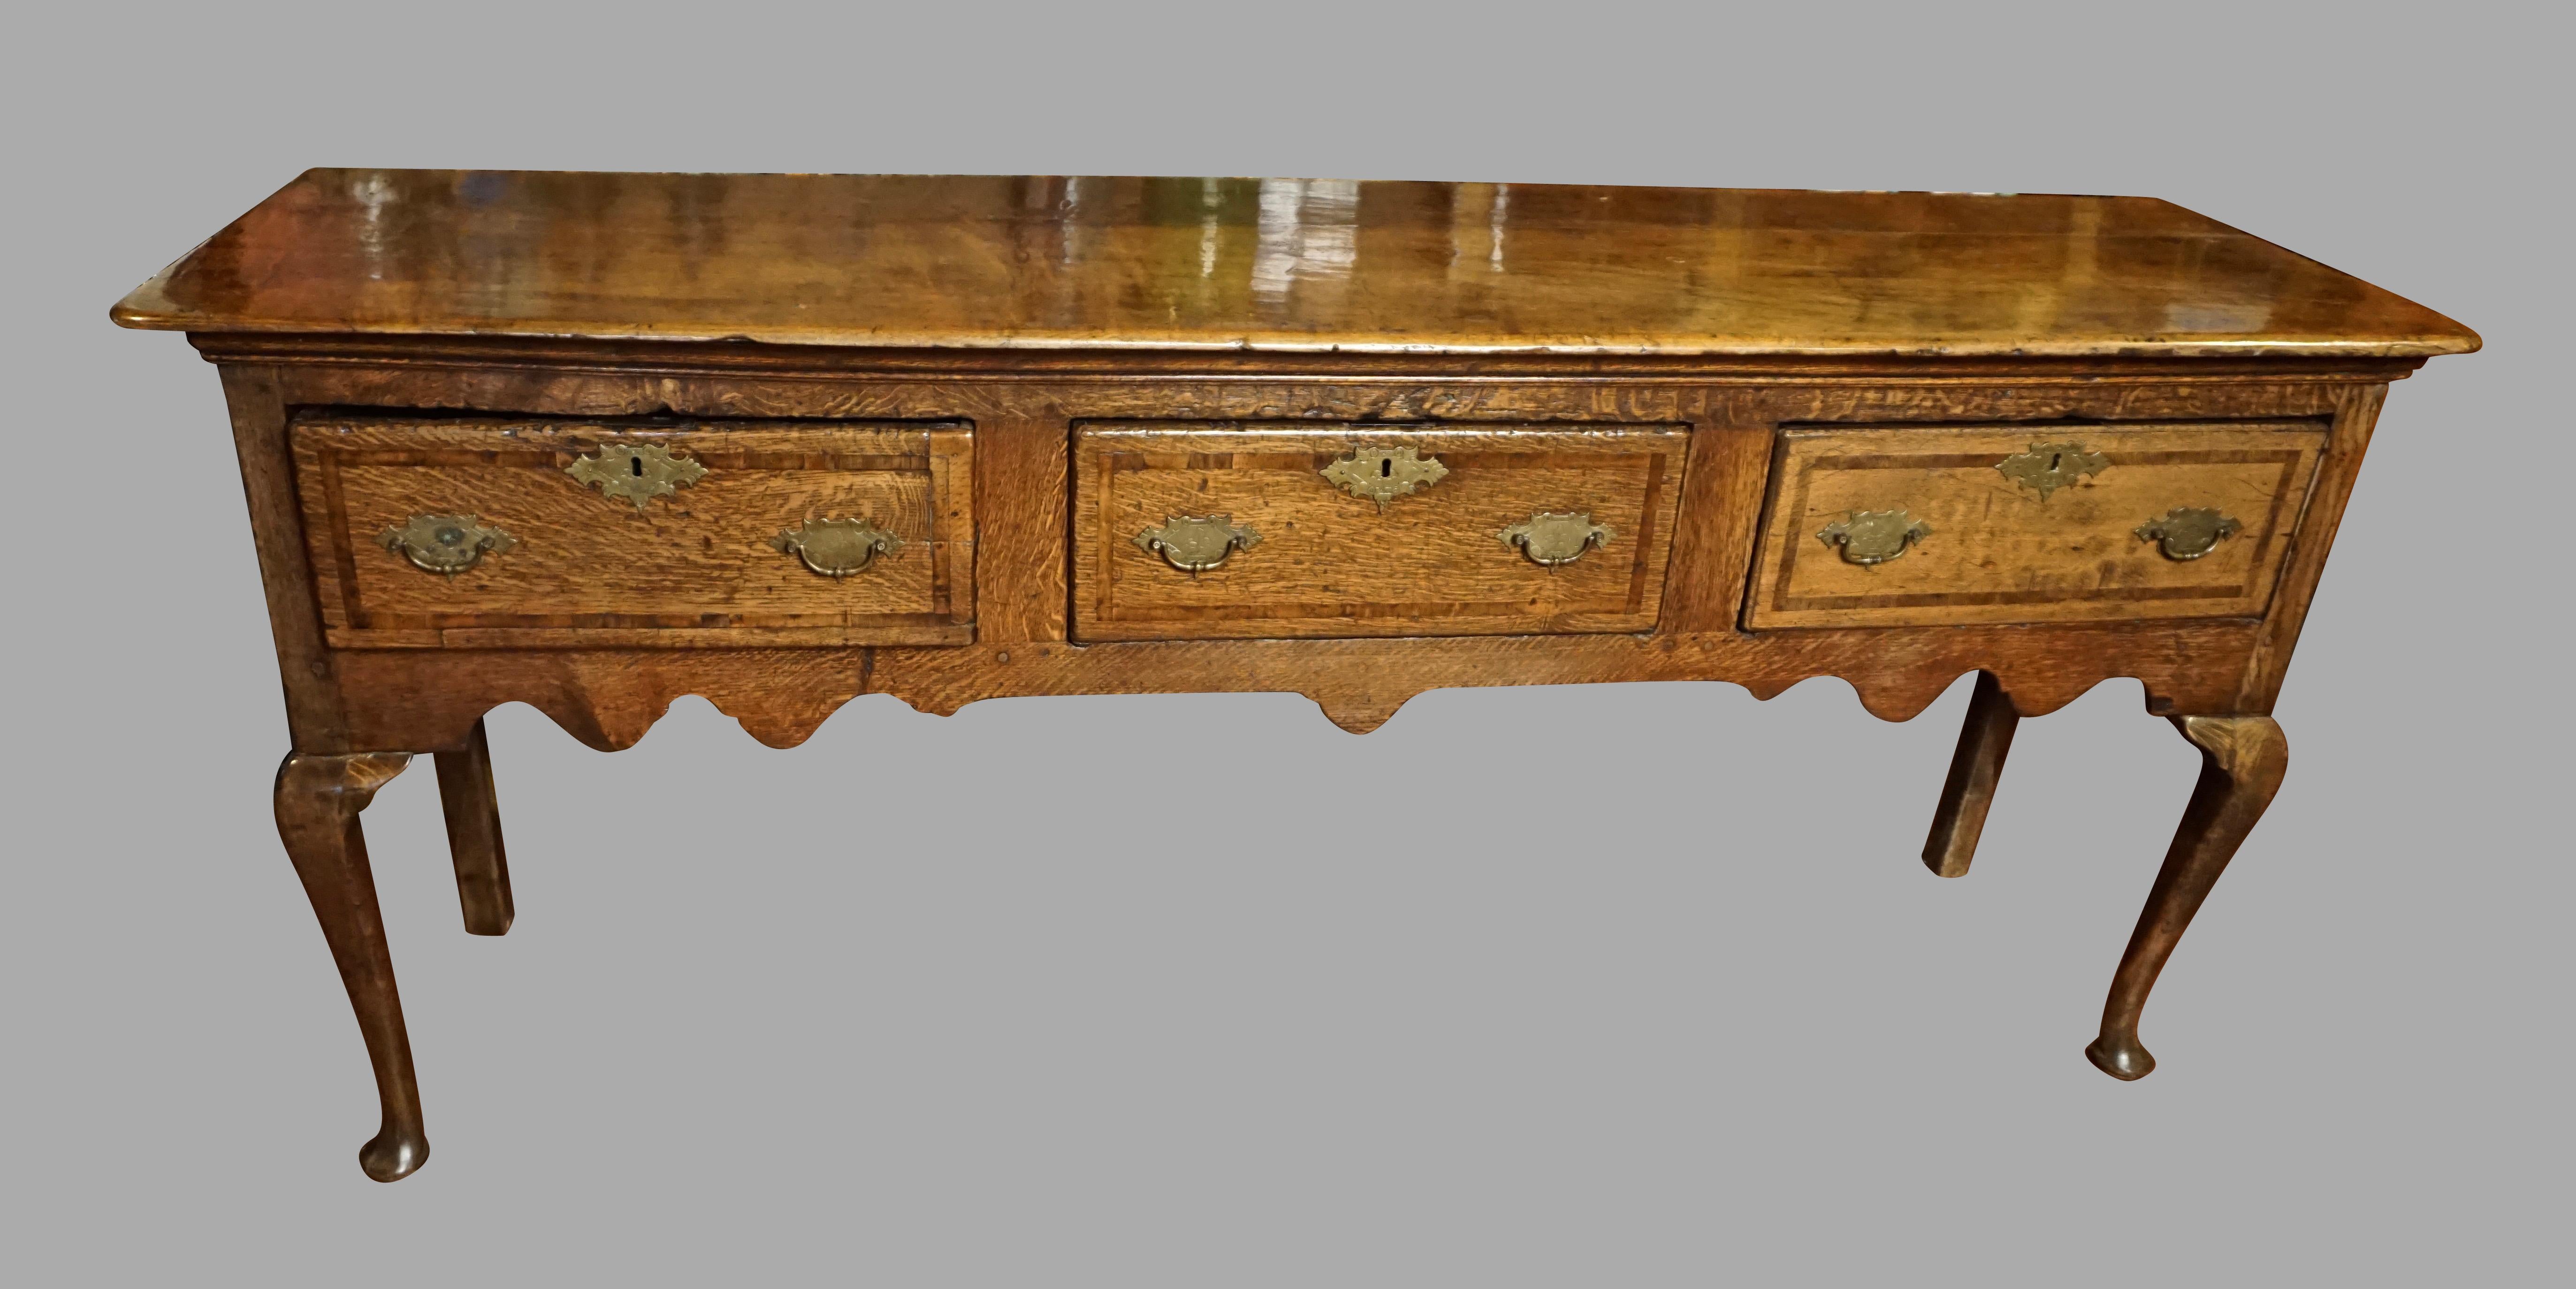 A good quality English oak dresser base, the molded overhanging top above 3 mahogany inlaid crossbanded drawers, the front with a wavy apron, supported on front cabriole legs ending in pad feet. 
Pegged construction. Replaced hardware. Circa 1760.